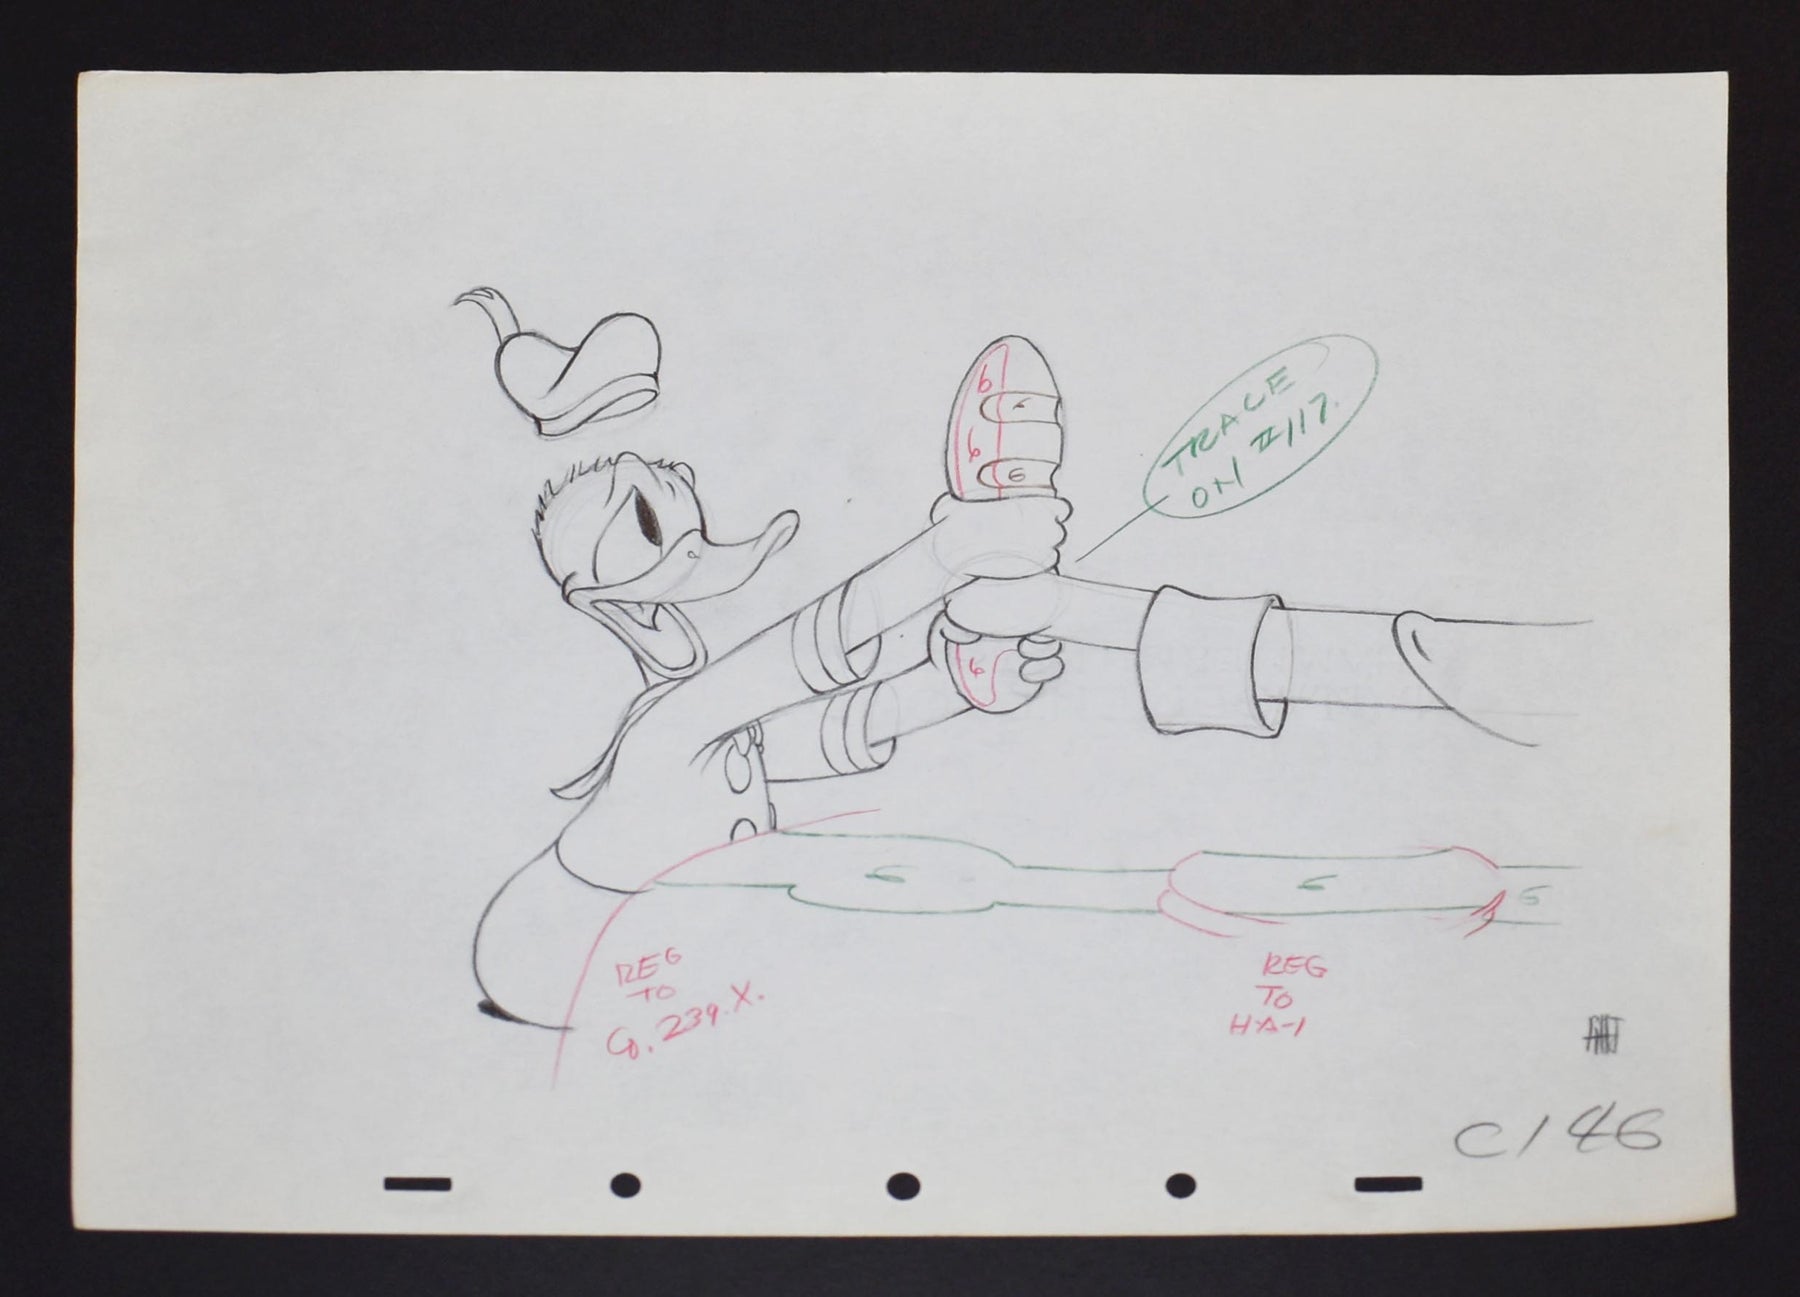 Original Walt Disney Production Drawing Of Donald Duck From Donalds